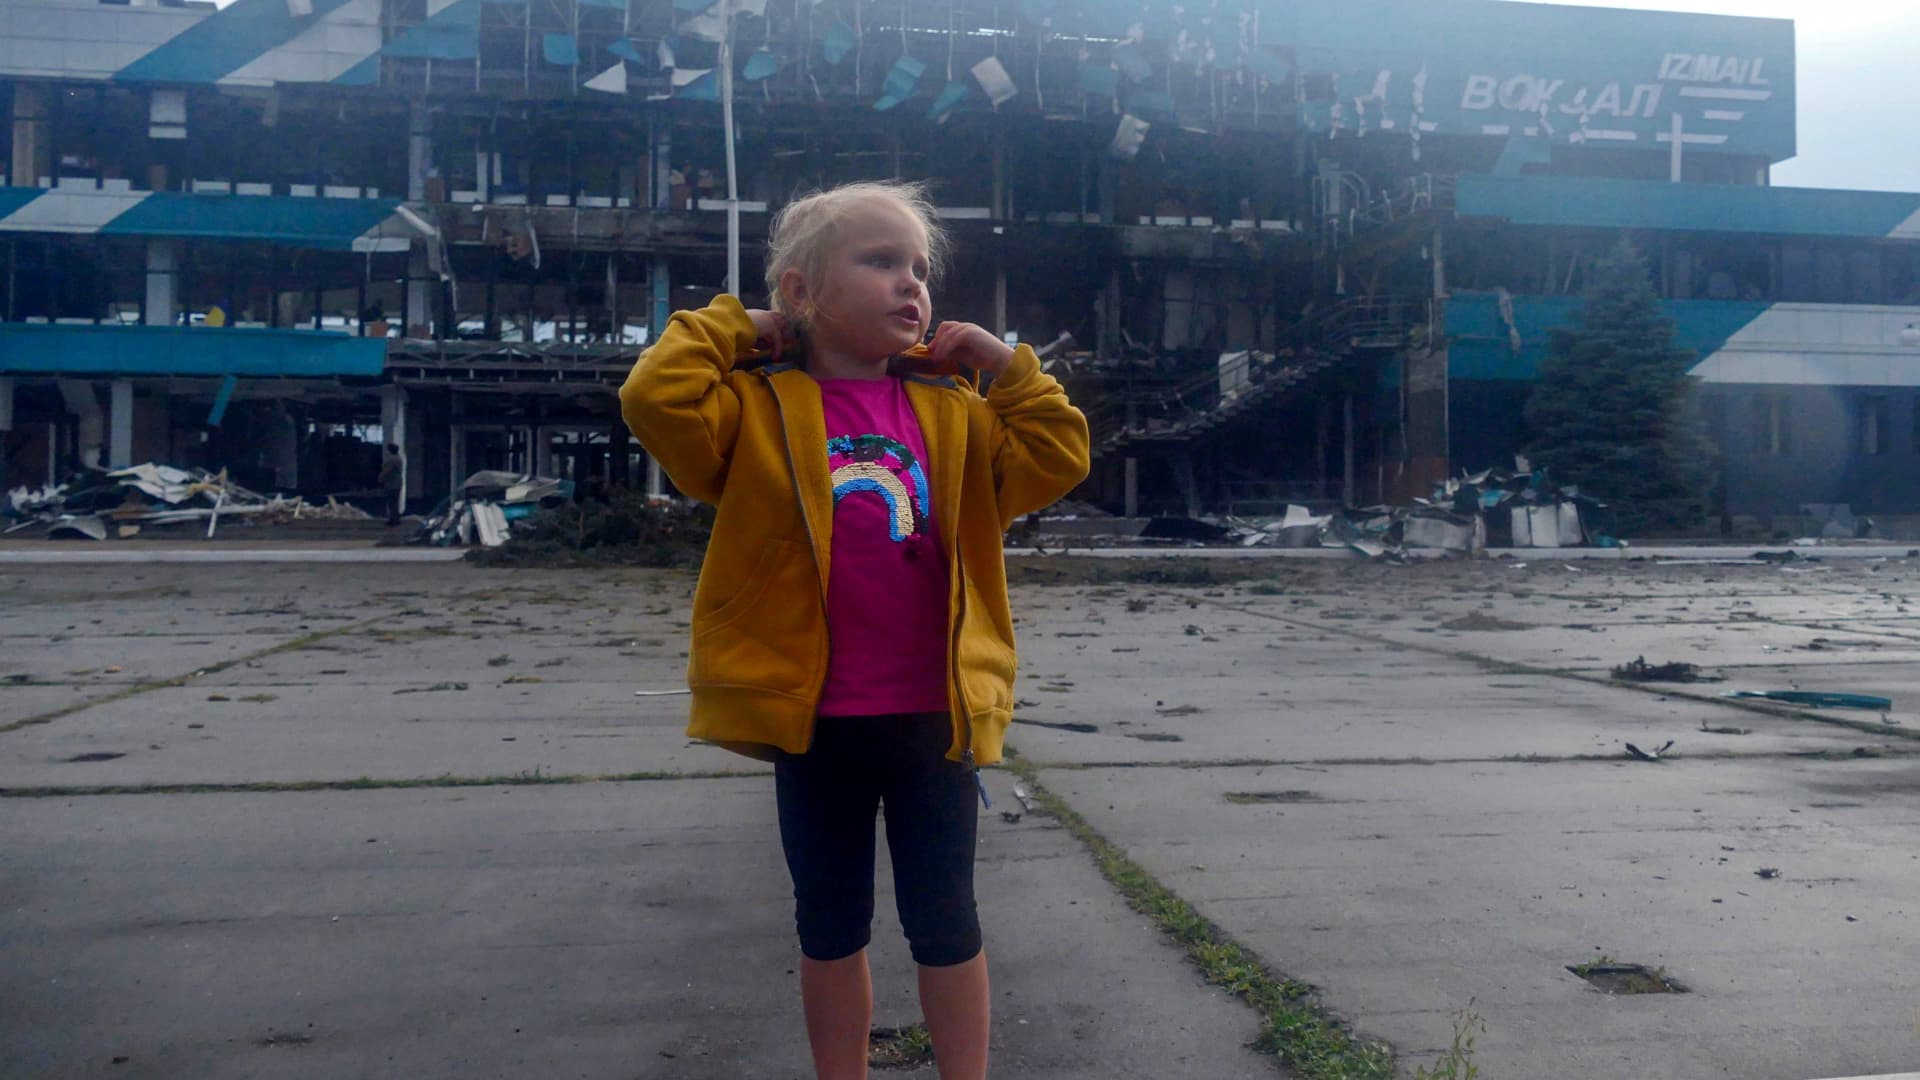 IZMAIL, UKRAINE - AUGUST 2, 2023 - A little girl is pictured during the building of the Marine Terminal damaged in the Russian drone attack on the port infrastructure of Izmail situated on the Danube River Wednesday night, August 2, Izmail, Odesa Region, southern Ukraine.NO USE RUSSIA. NO USE BELARUS. (Photo by Ukrinform/NurPhoto via Getty Images)